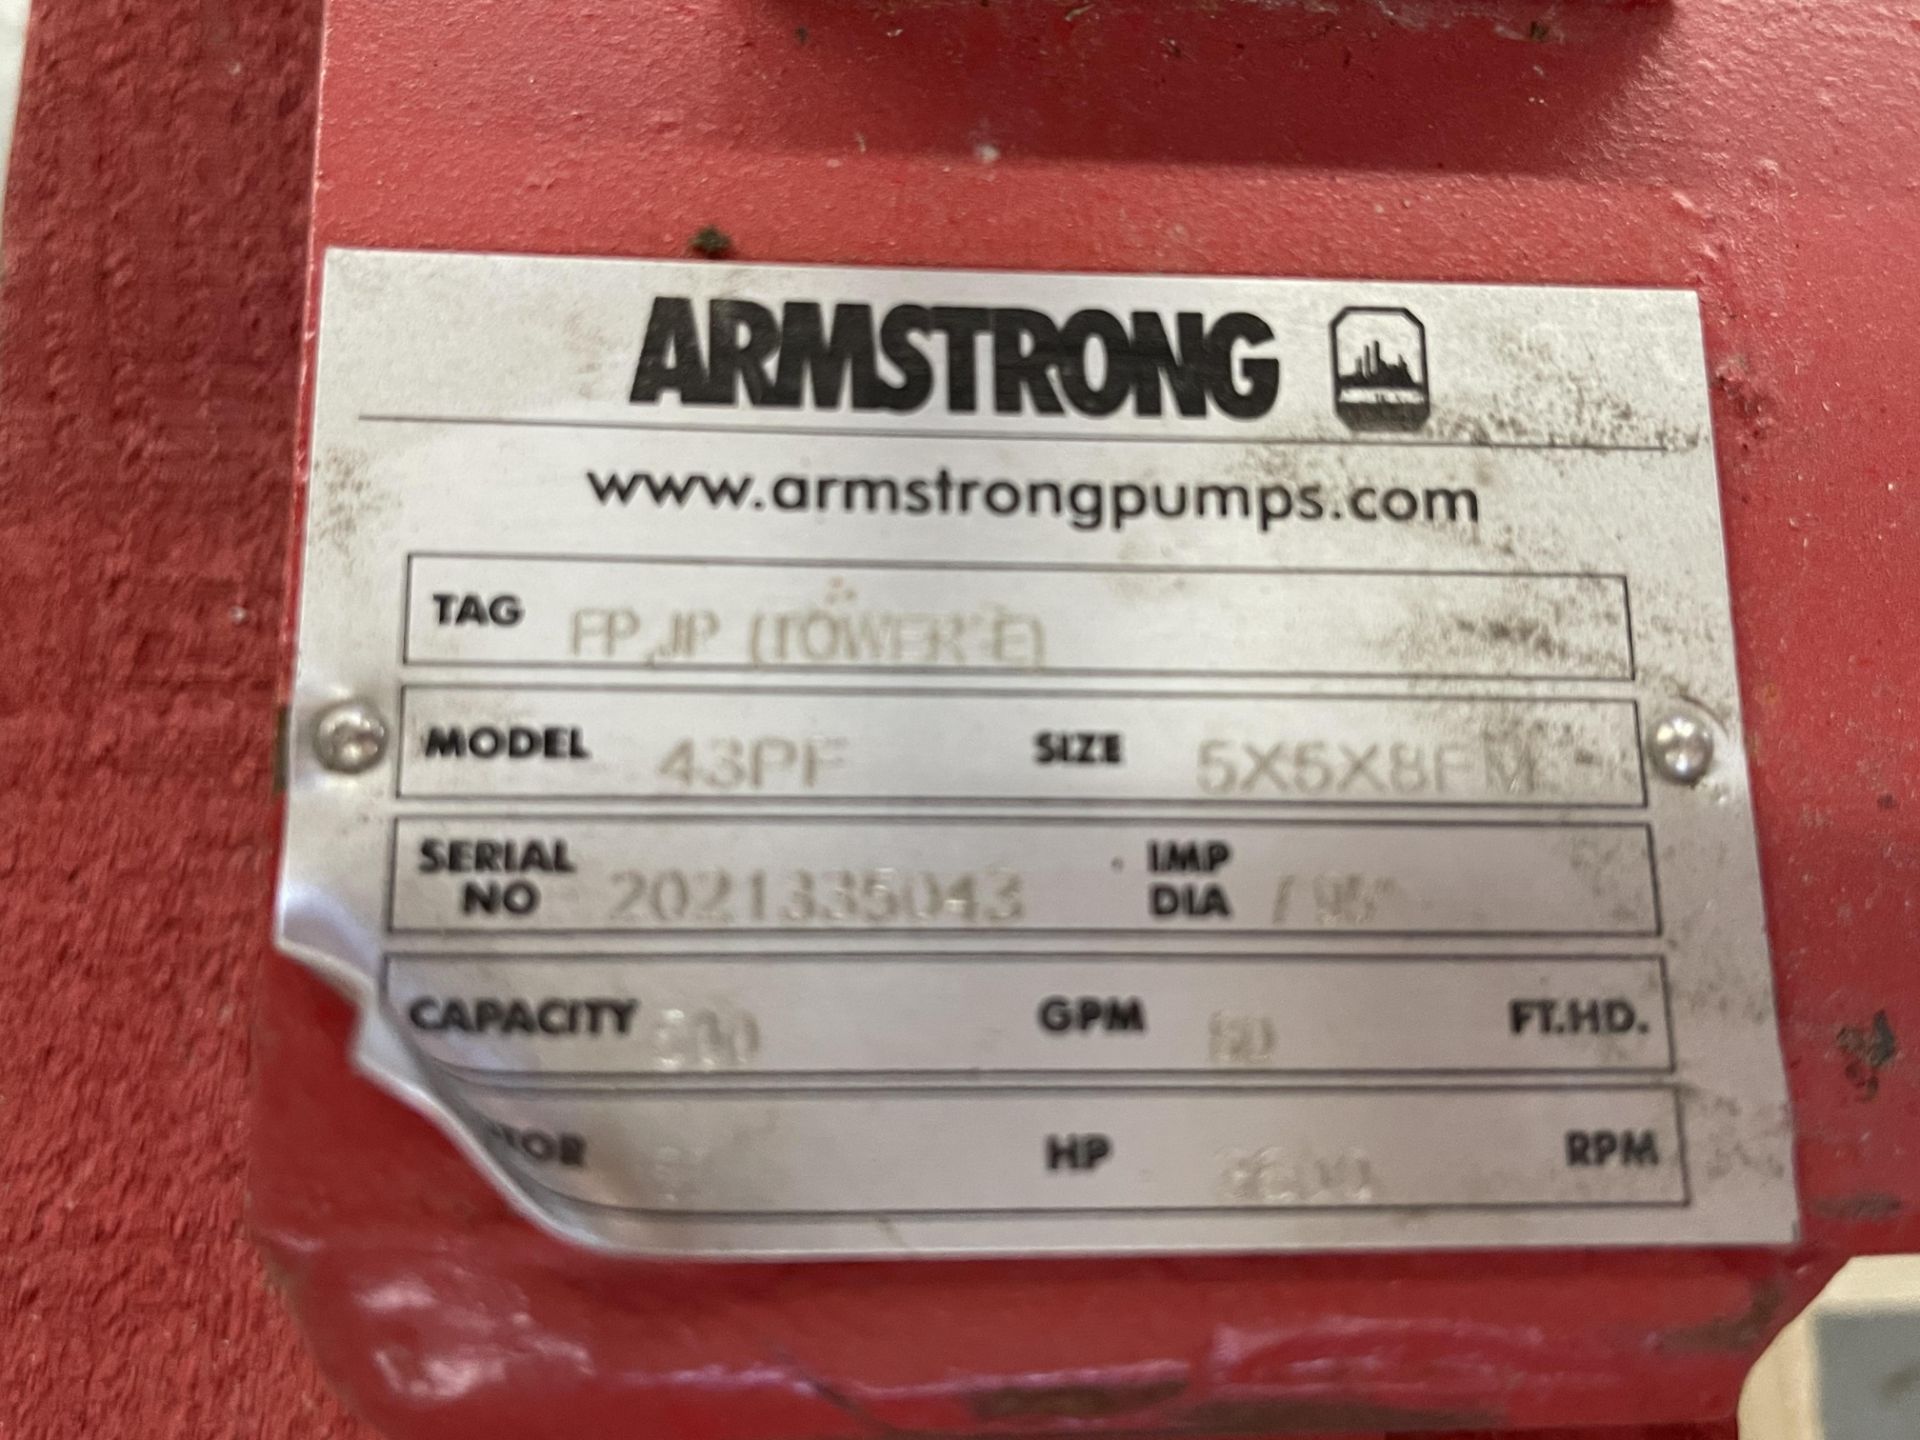 NEW (2021) ARMSTRONG VERTICAL IN-LINE FIRE PUMP, MODEL 43PF, 5 X 5 X 8FM, 181 MAX PSI W/50HP - Image 12 of 12